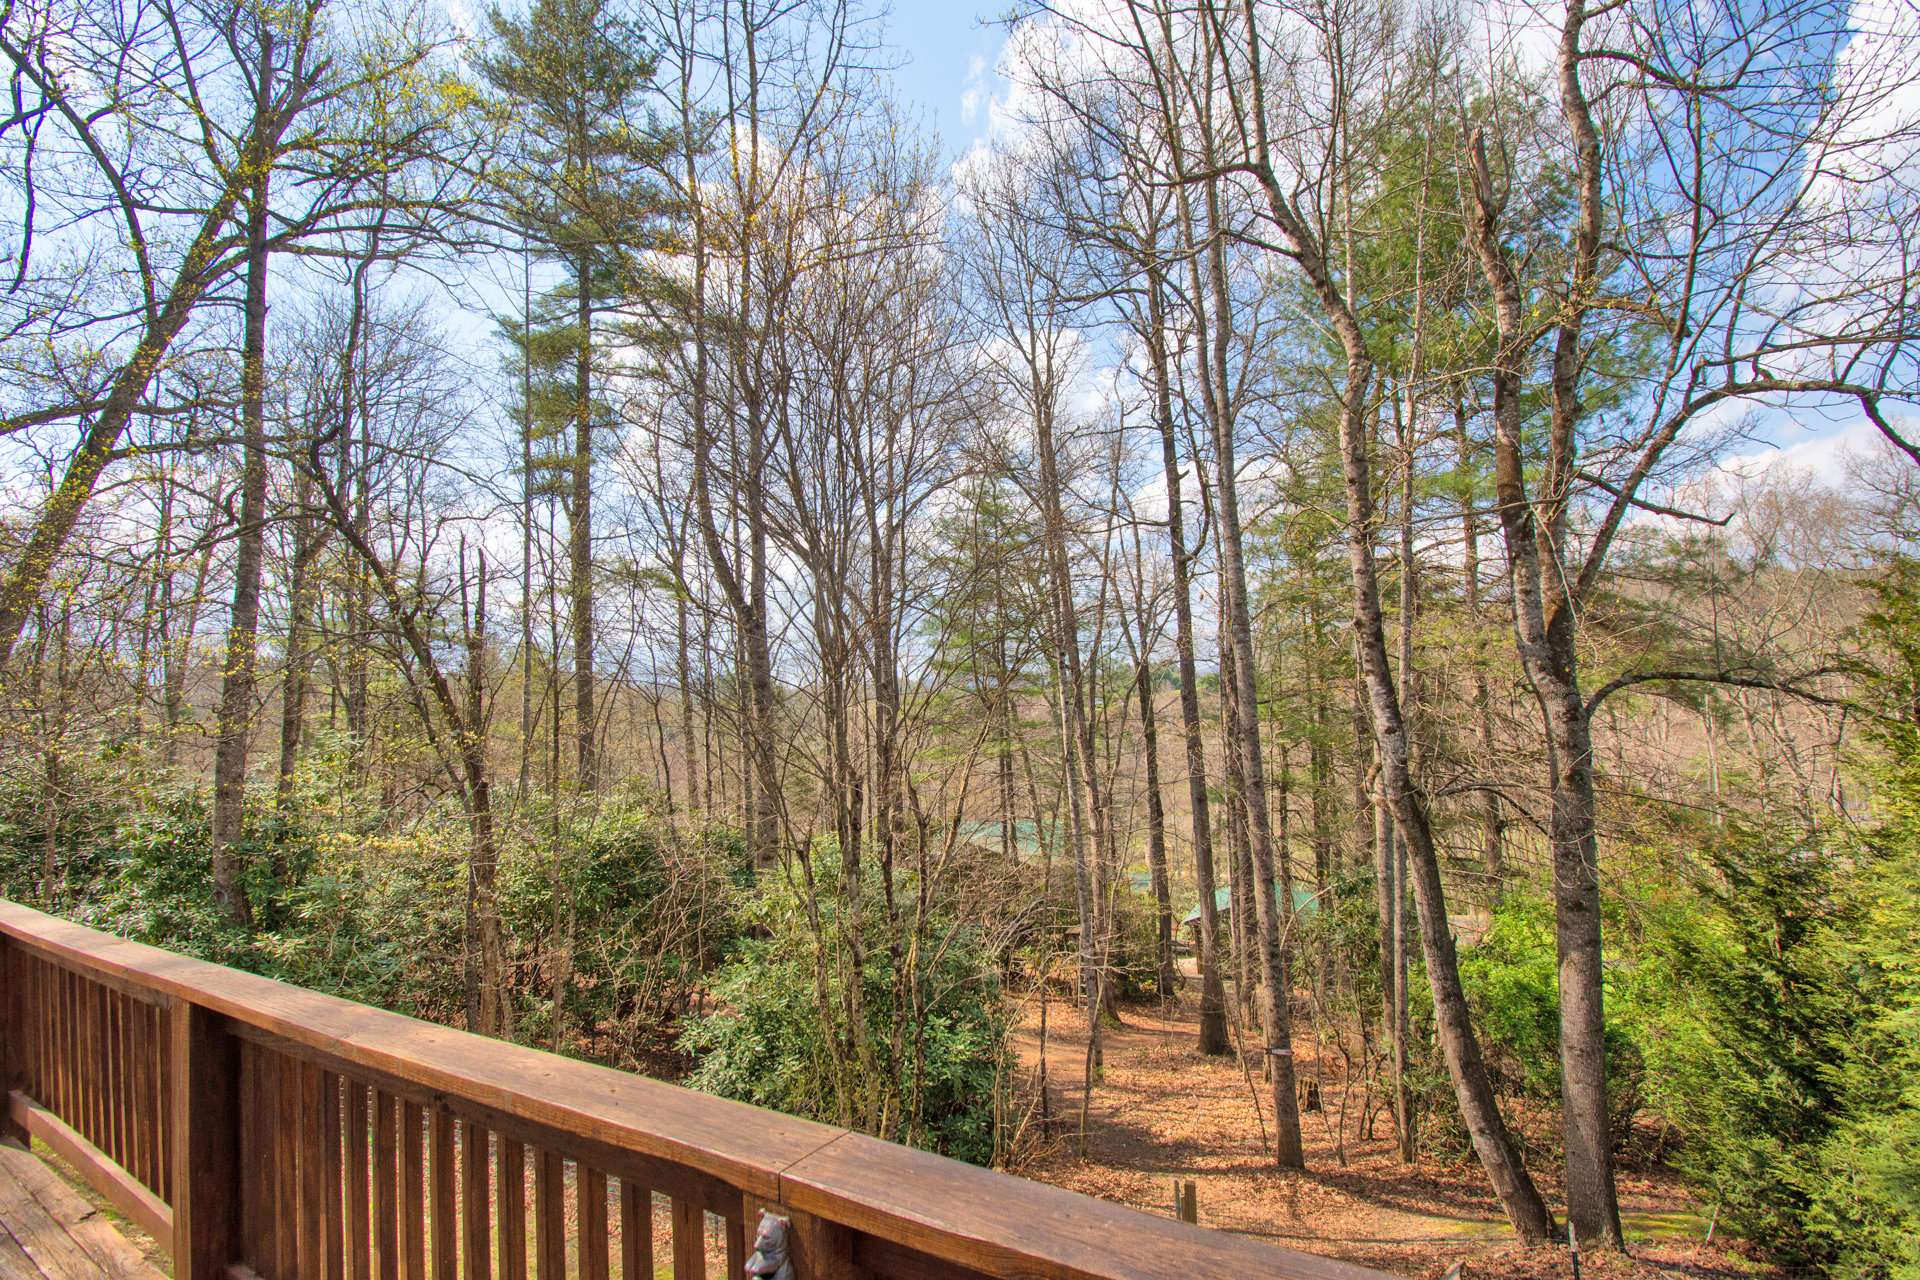 Relax with your favorite beverage and enjoy the sounds of the surrounding woodlands.